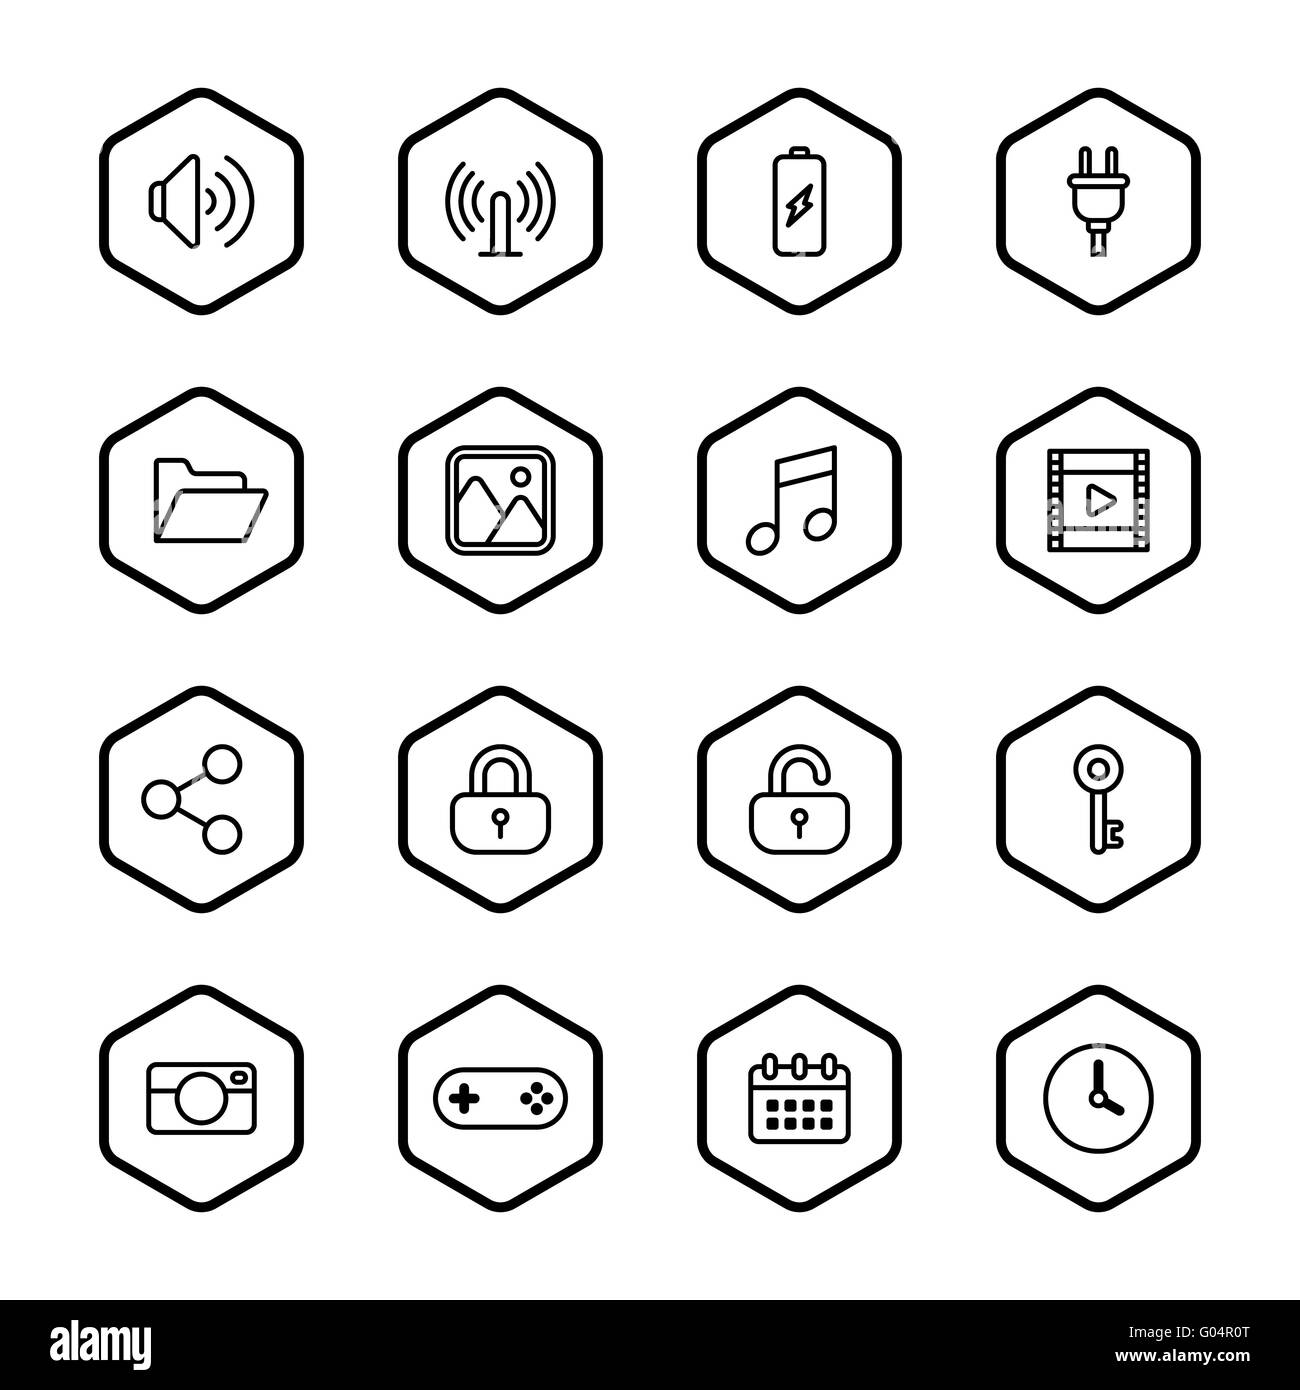 [JPEG] black line web icon set with hexagon frame for web, UI, infographic and mobile apps Stock Photo